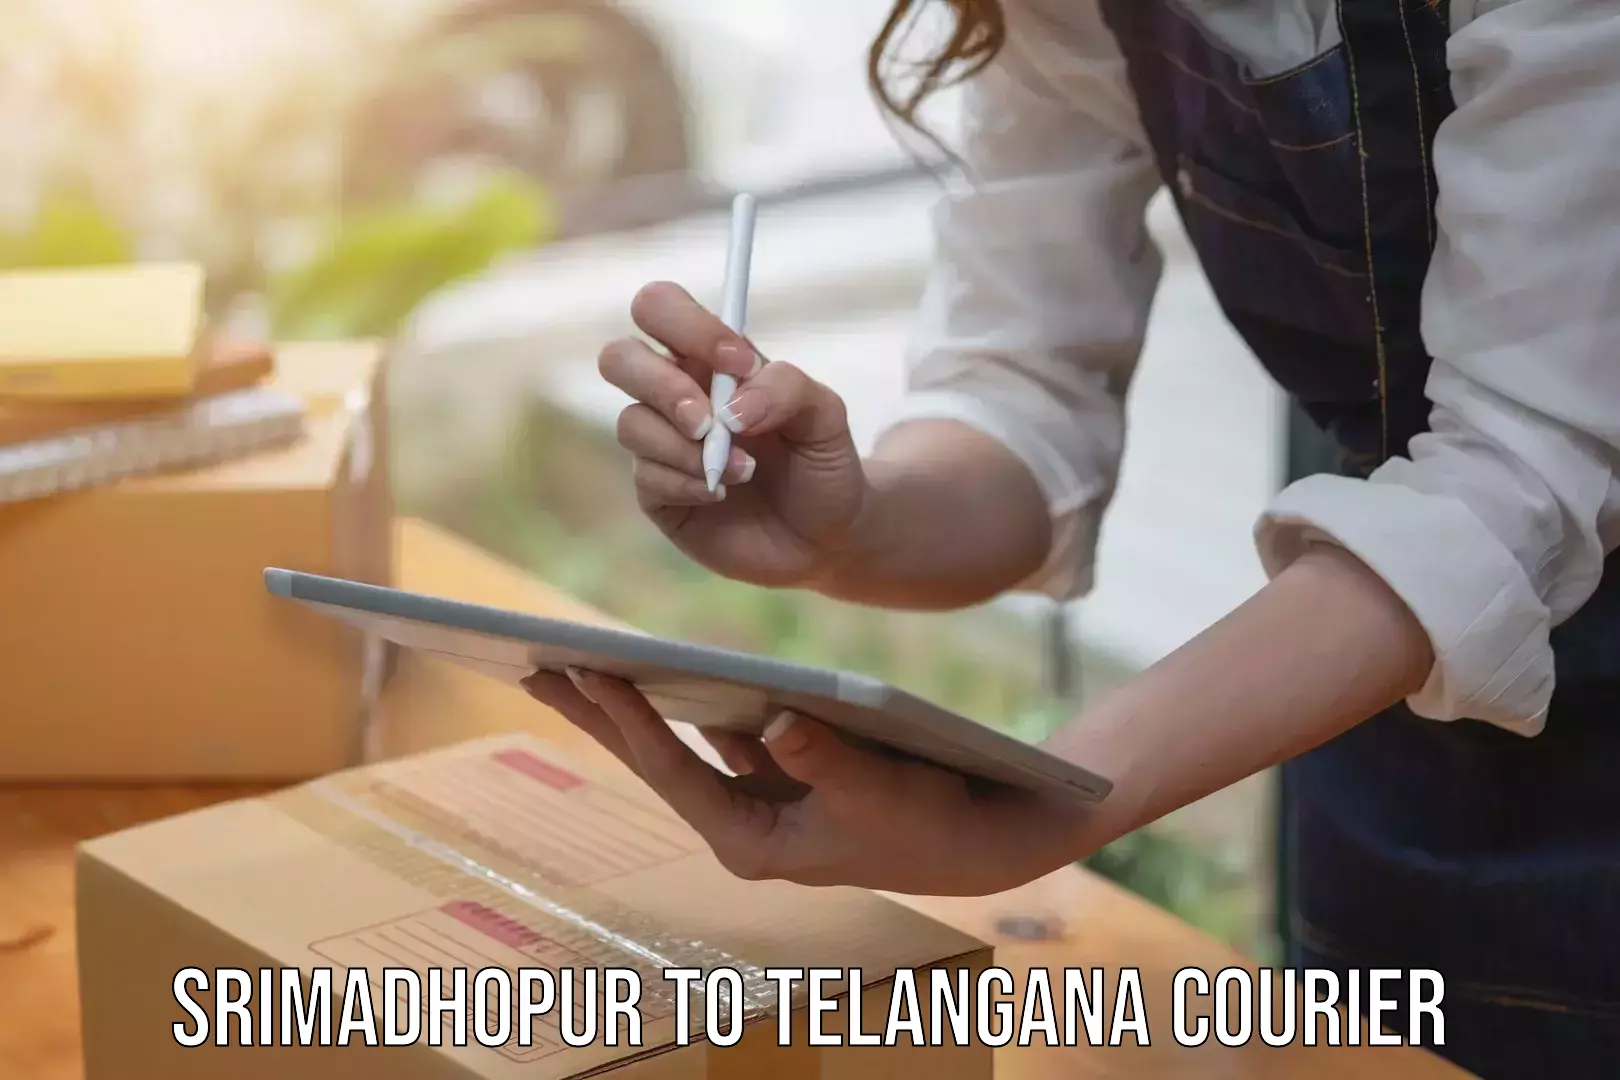 Reliable courier services in Srimadhopur to Telangana